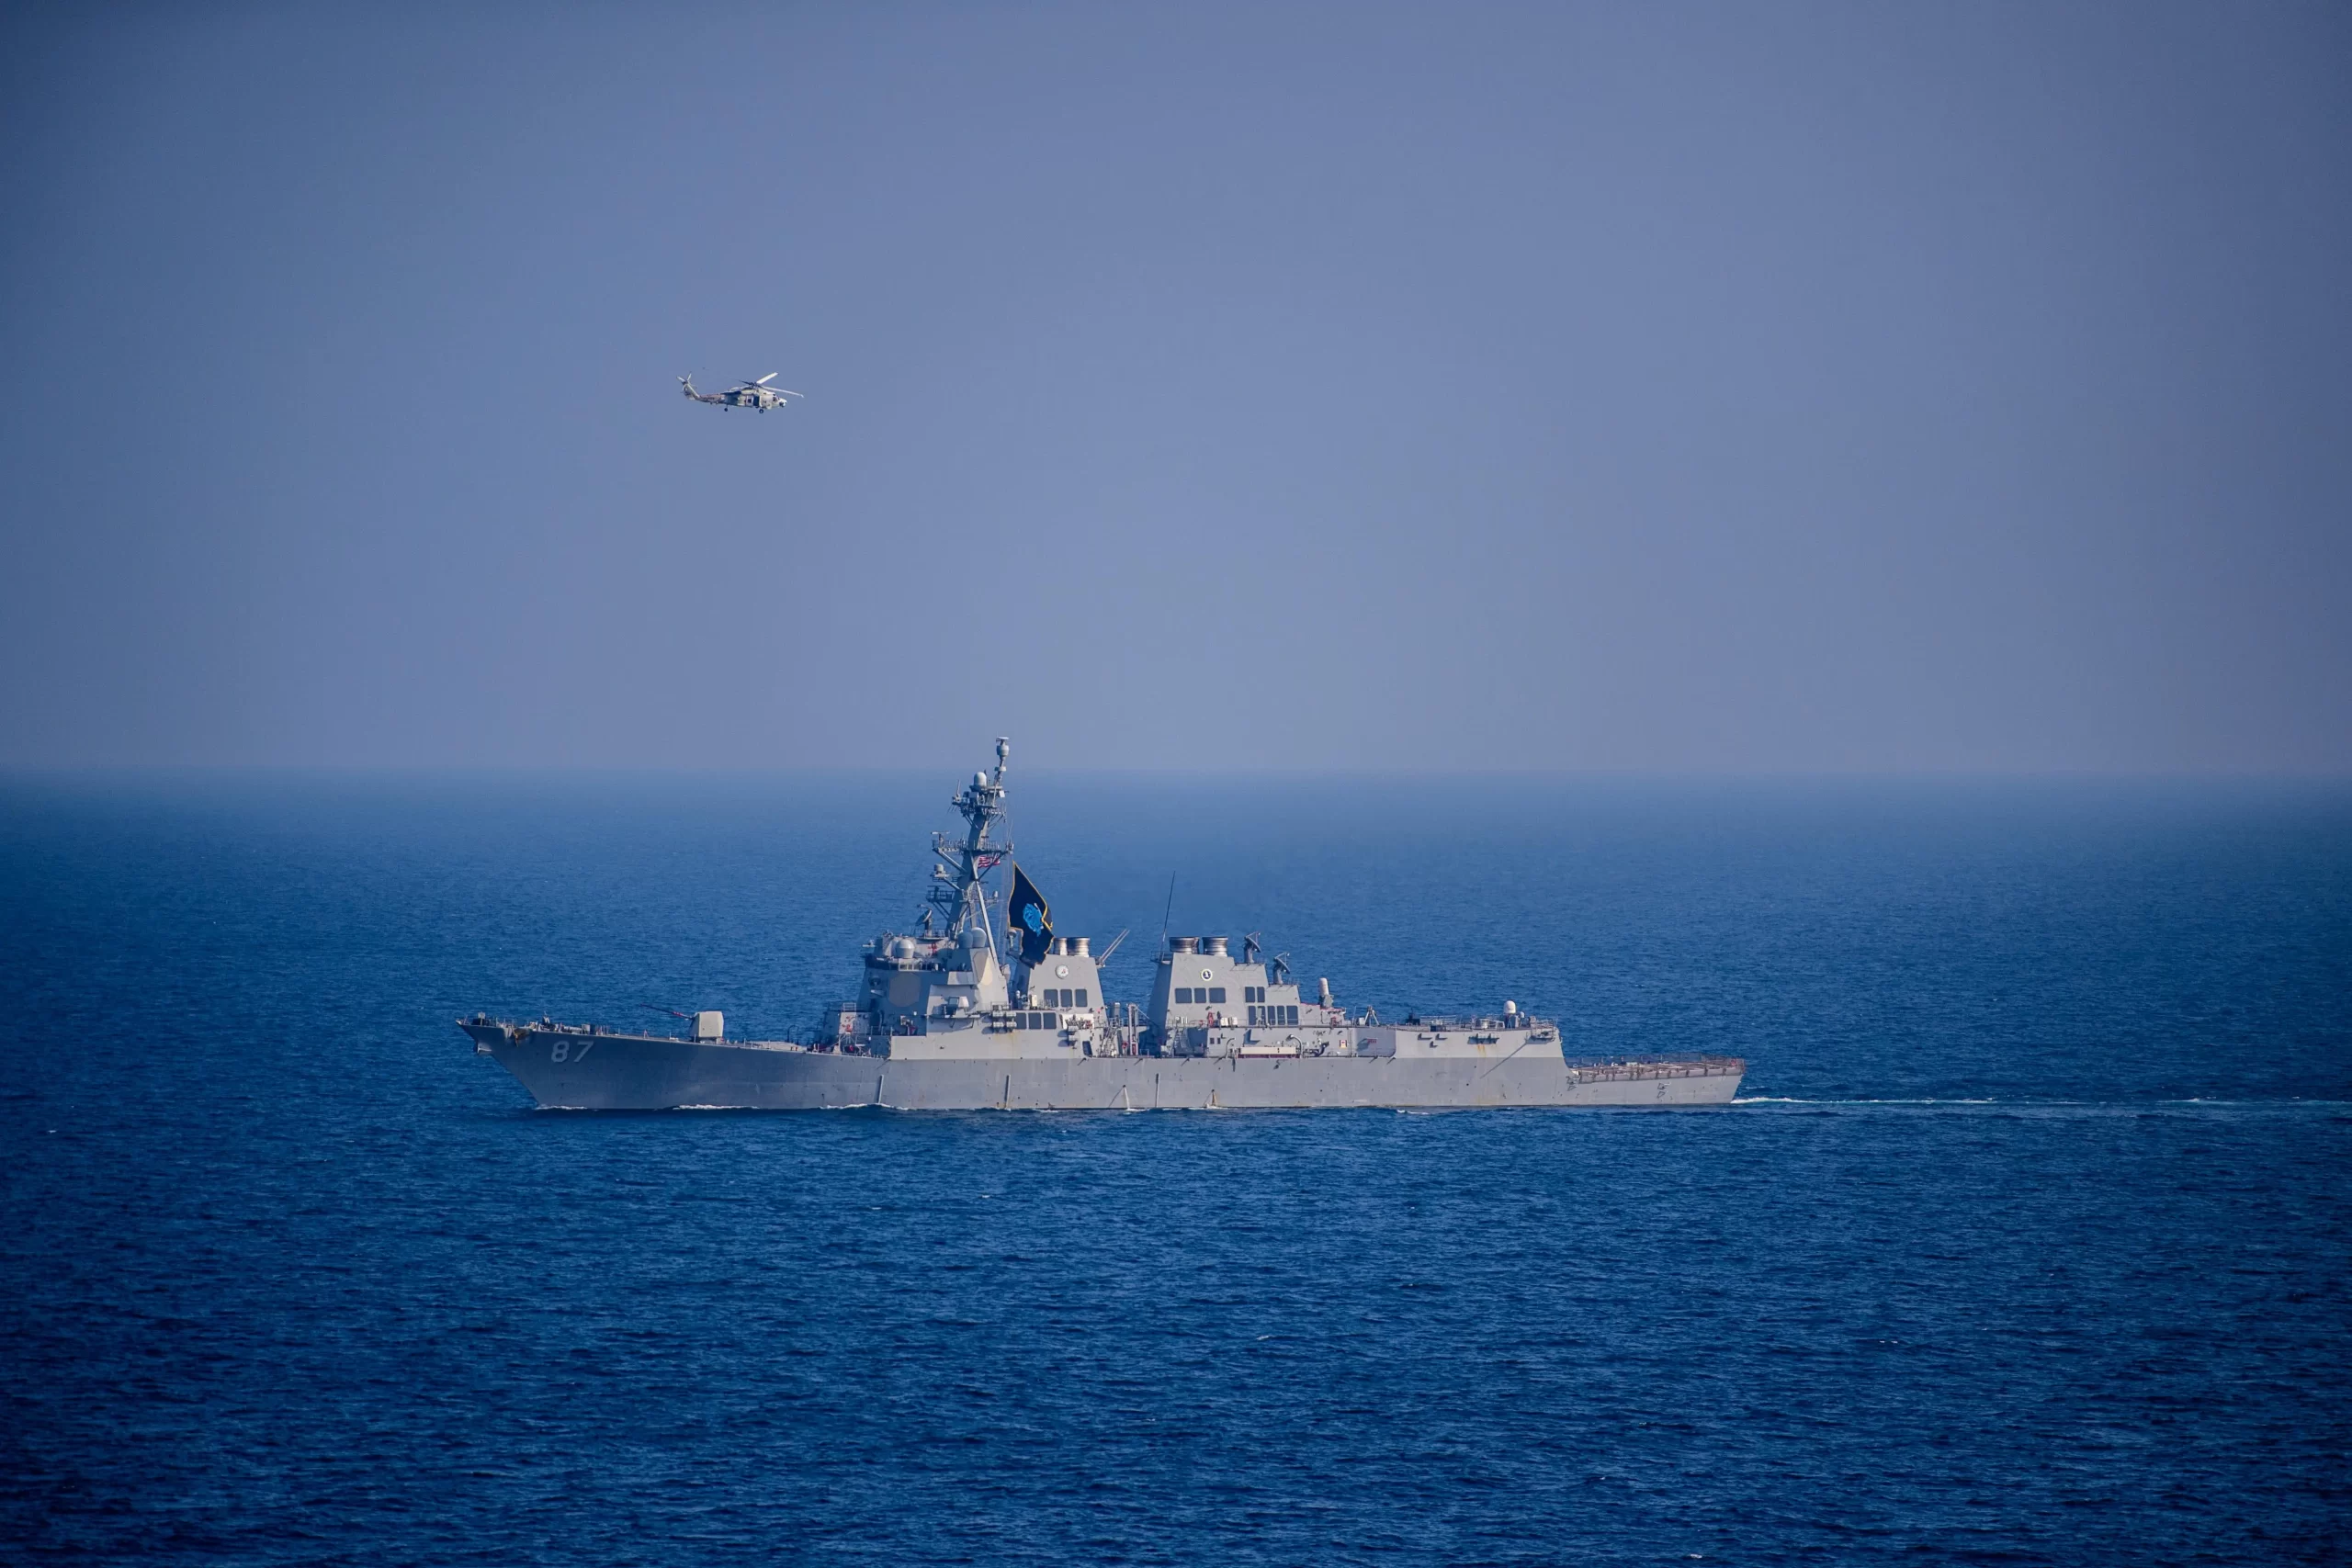 U.S. forces neutralized new Houthi threats in Red Sea